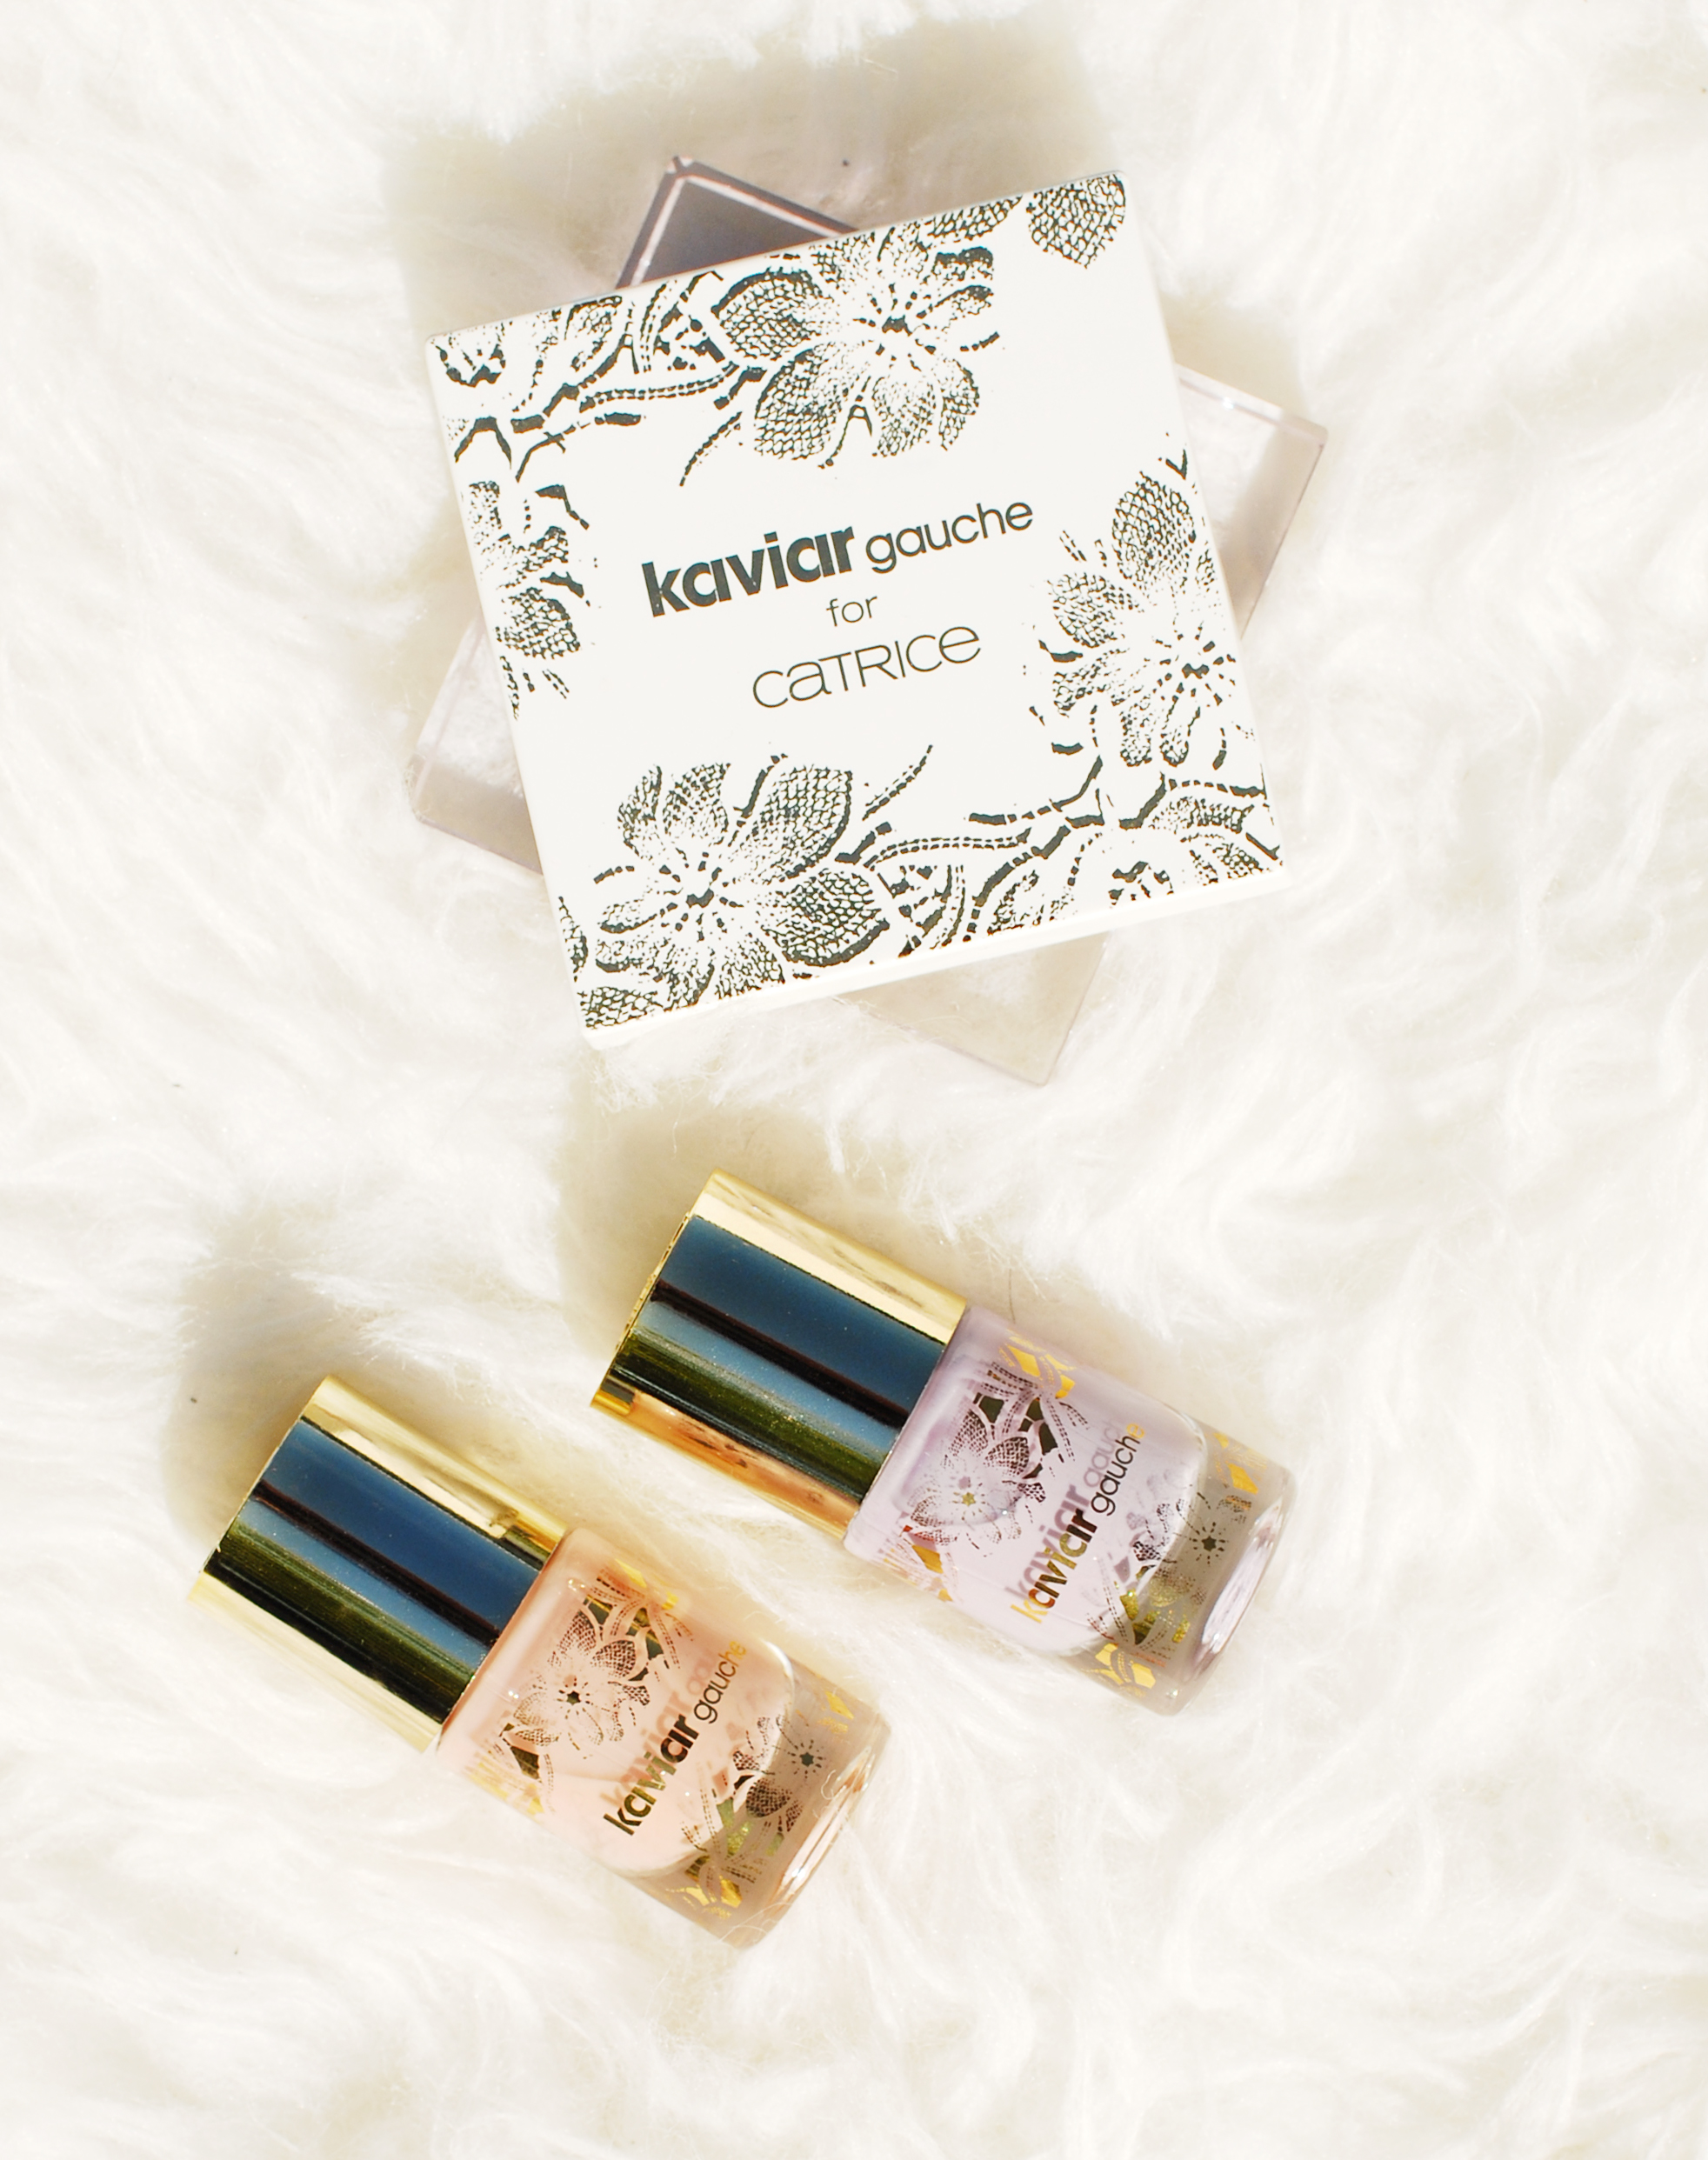 Kaviar Gauche for Catrice limited edition c01 sweet secret c02 honey blossom c03 love me tender review swatch lifestyle by linda